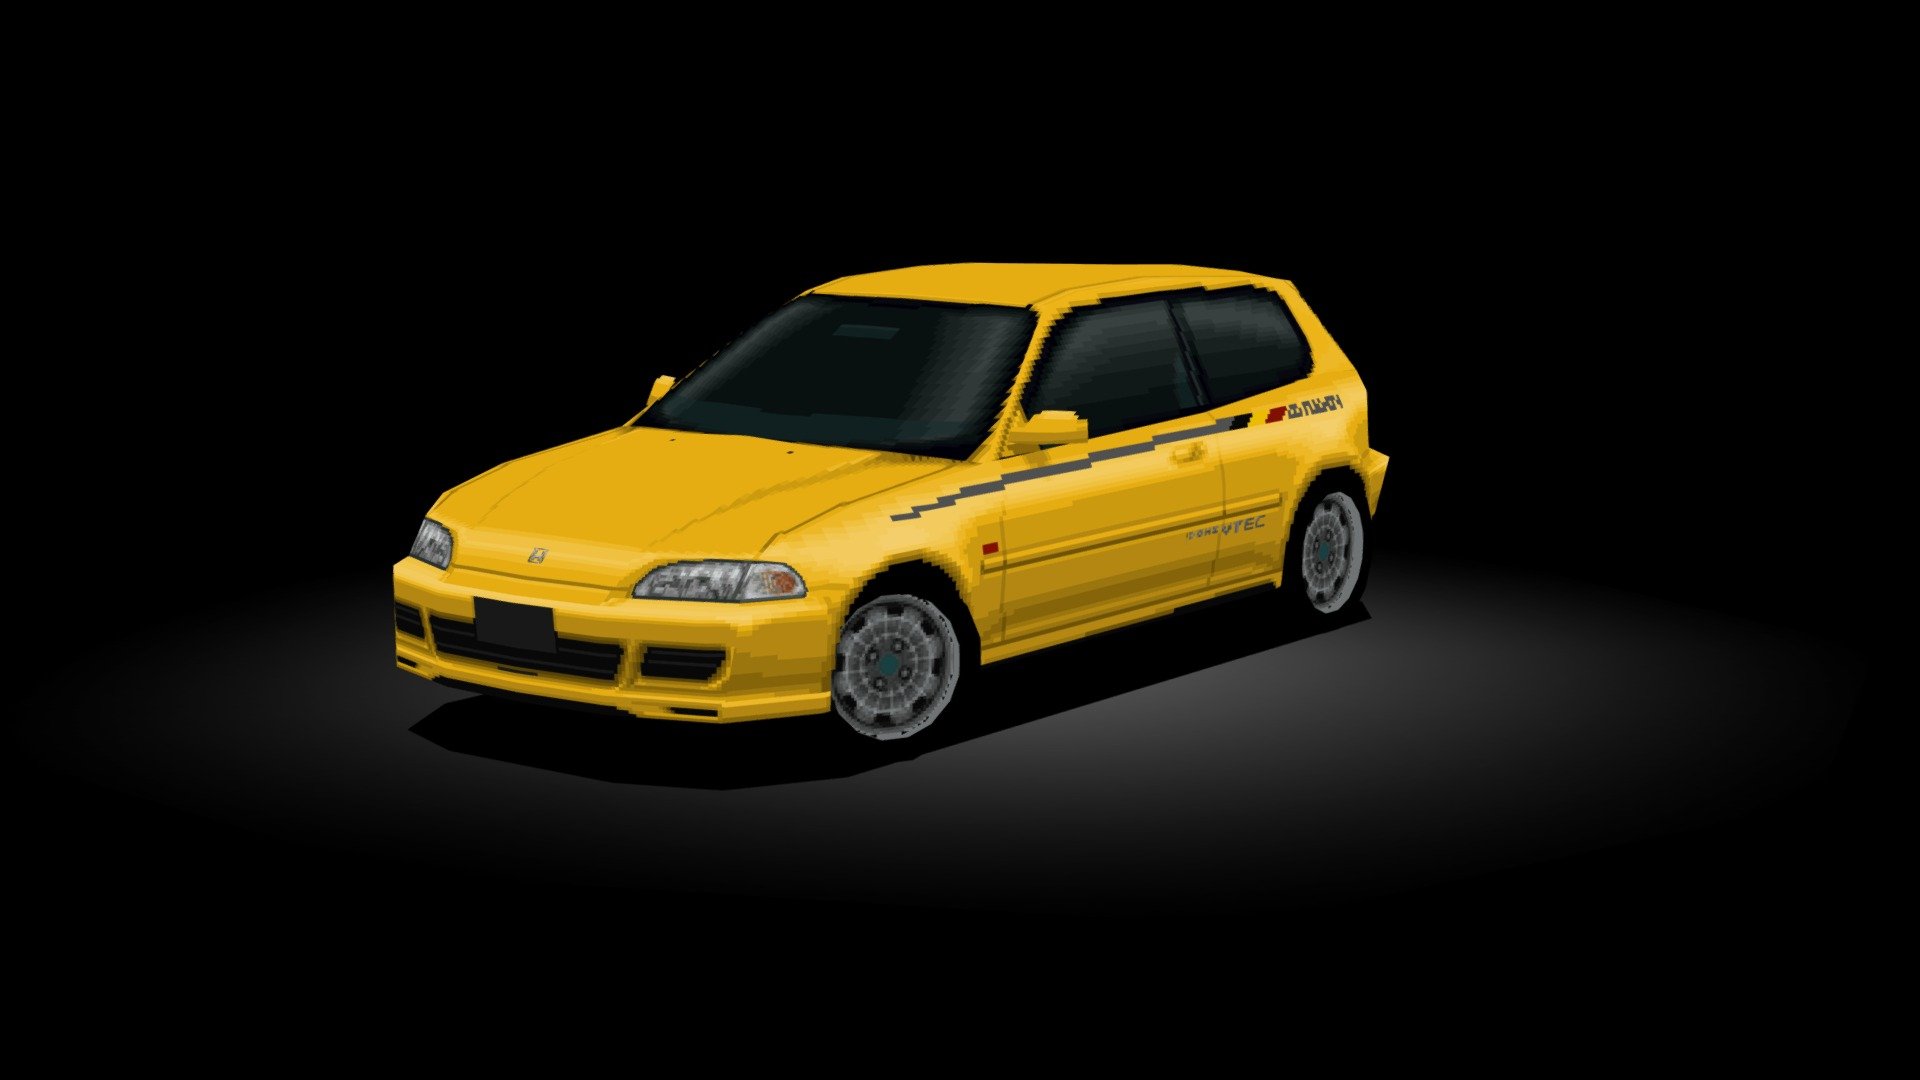 A recreation of the Mugen bodykit for the 1995 Honda Civic SiR-II (EG) in Gran Turismo 2. 
I altered the model and its UVs slightly, the texture was made by me. 
You can watch the car in-game here: https://www.youtube.com/watch?v=EJ_z0oltmqU

Made in 2018 3d model